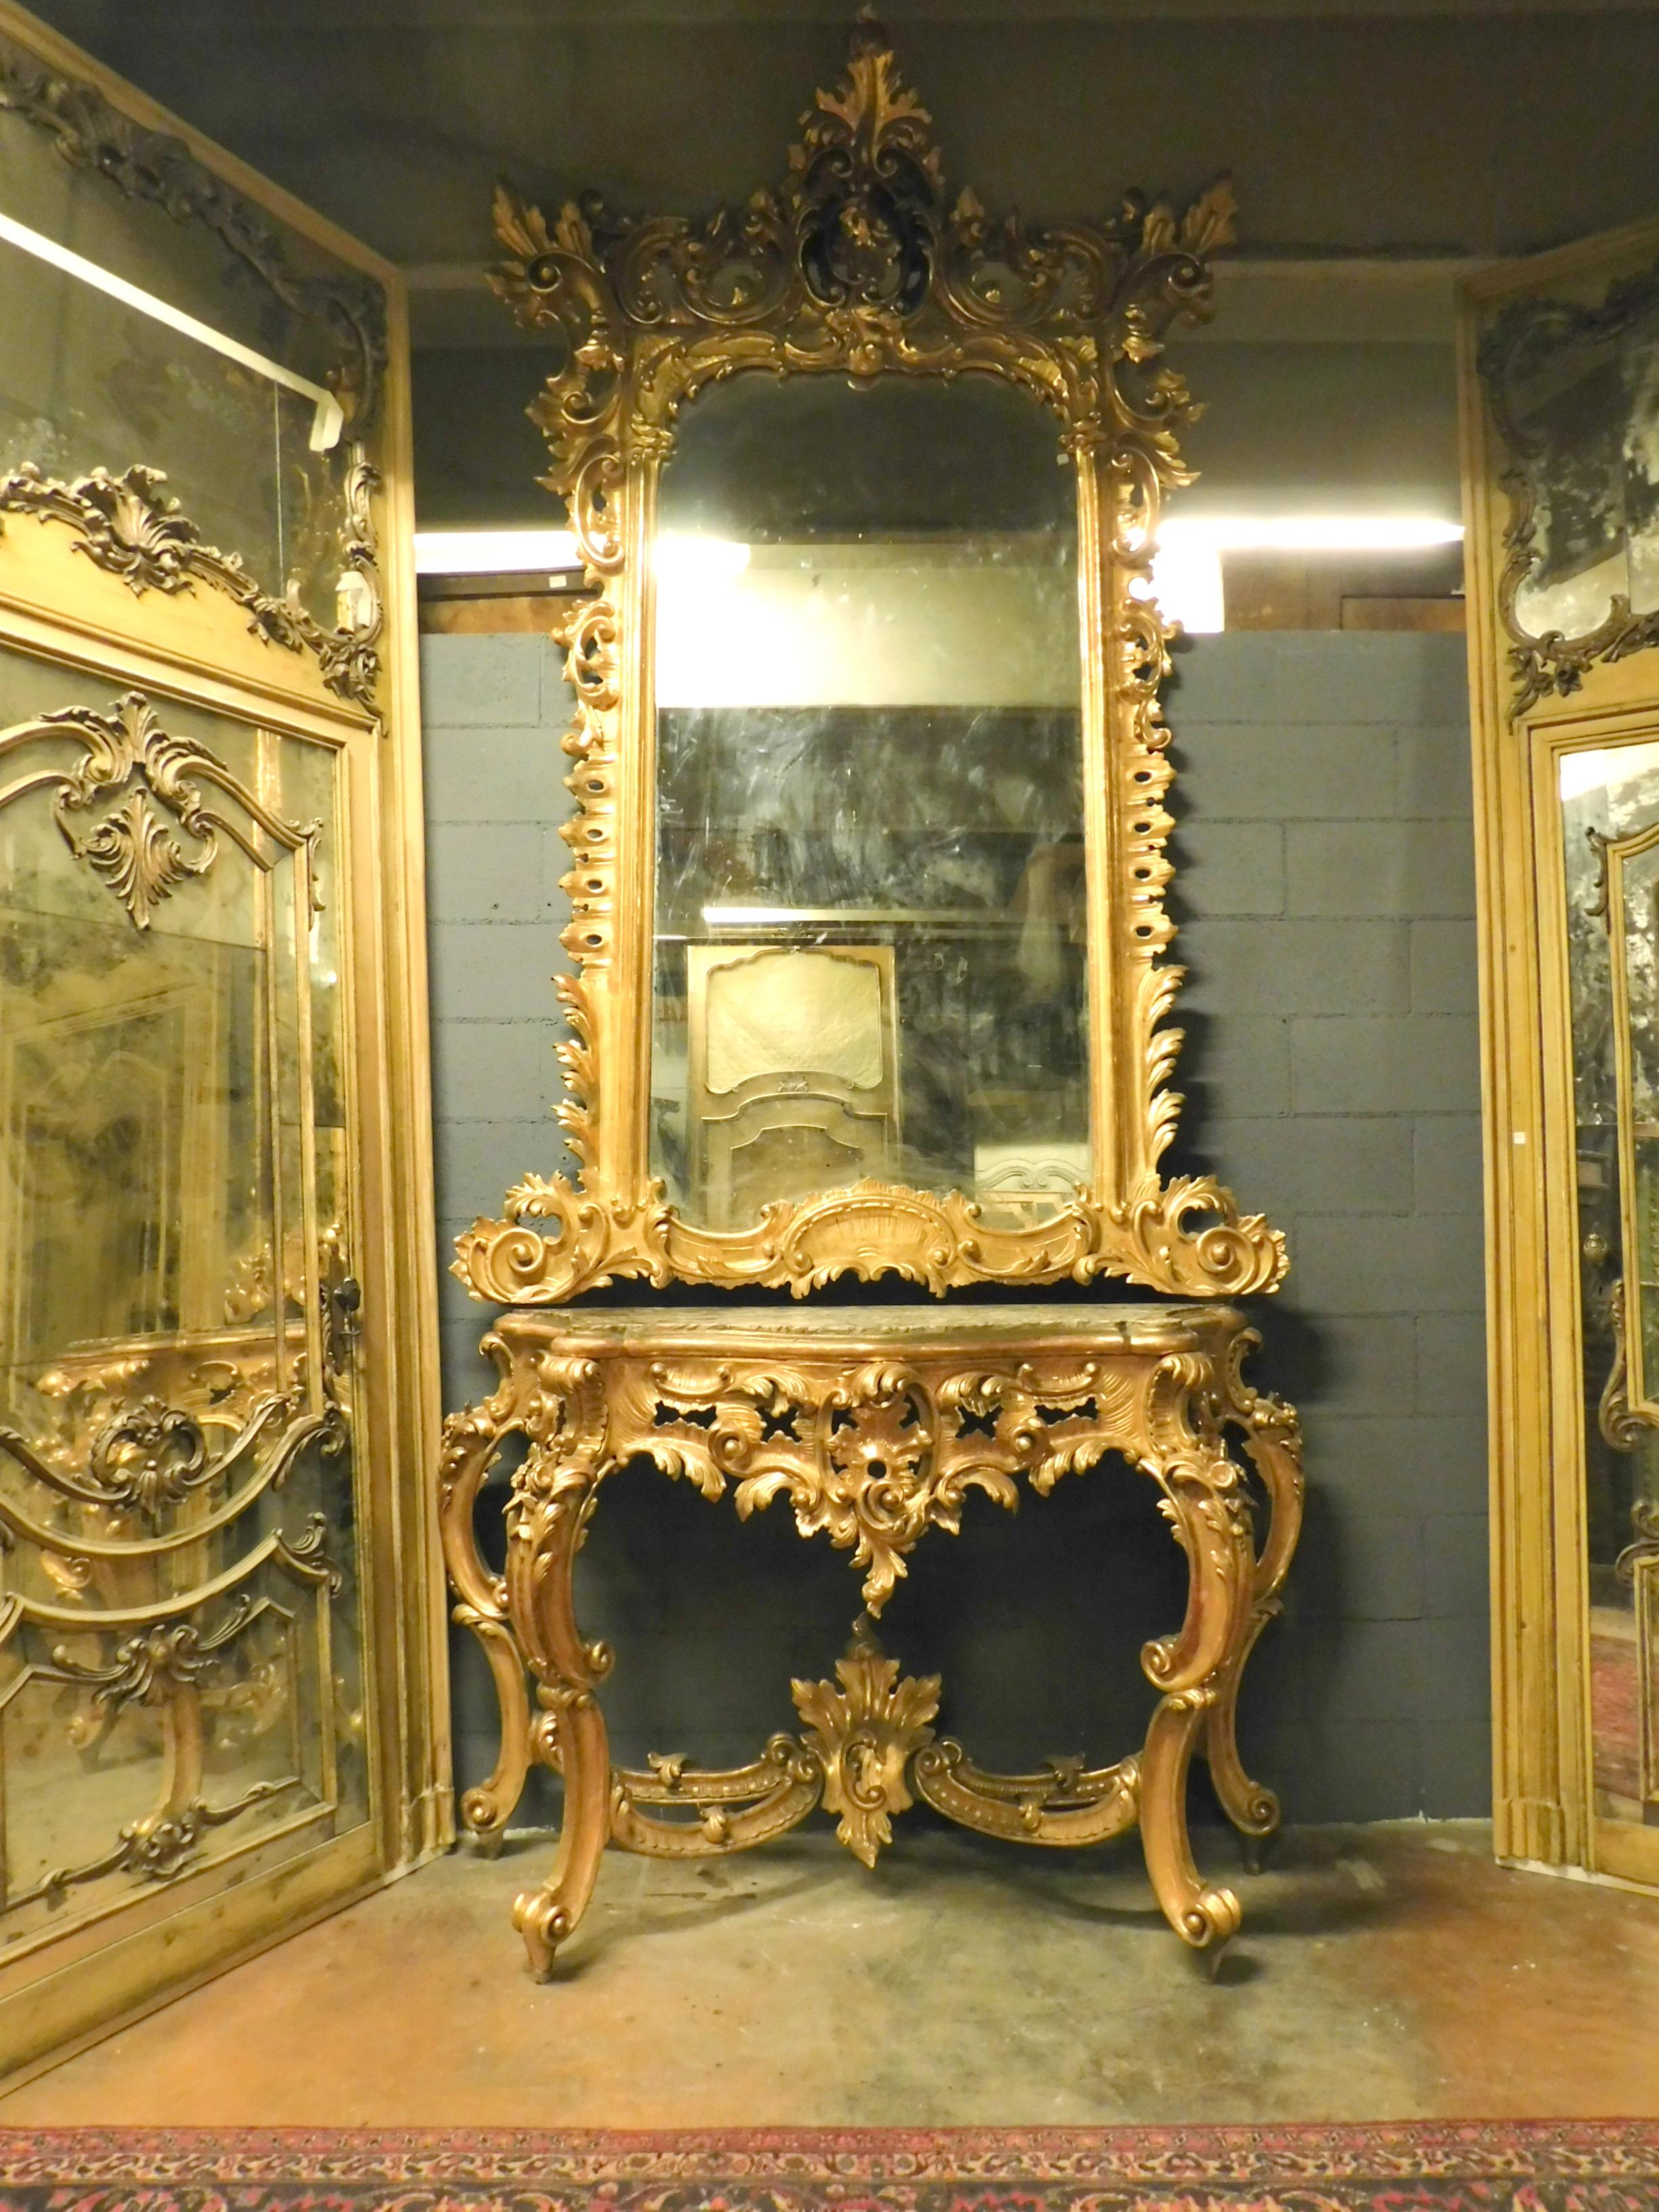 Ancient and important gilded console, composed of, gilded wooden mirror, with very rich sculptures, and marble console top with carved and gilded legs. Coming from an important historic building in Naples (Italy), entirely hand carved in the 18th